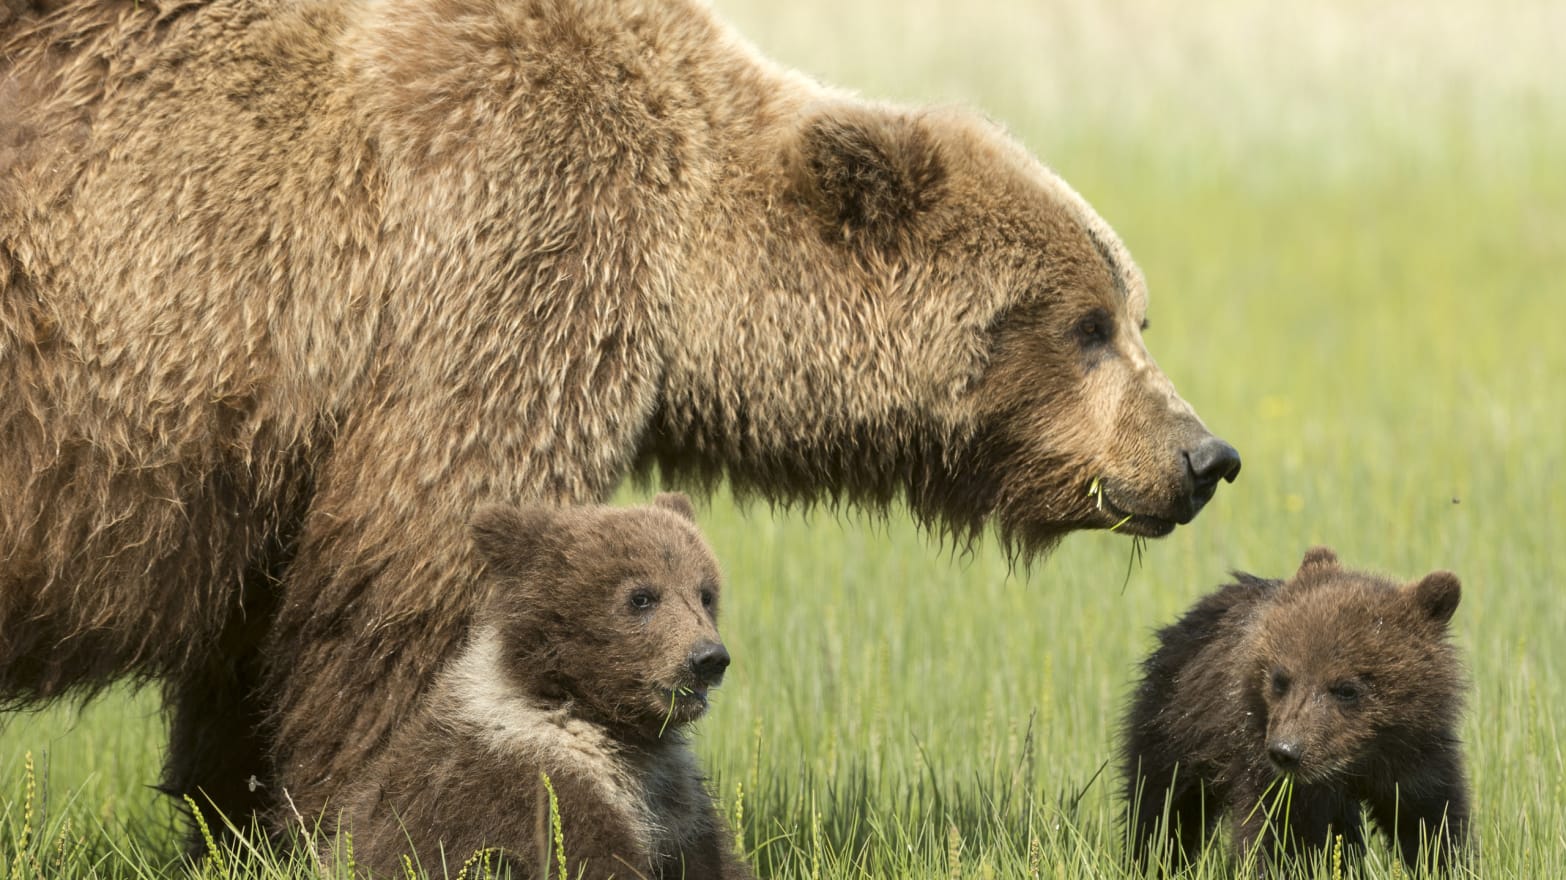 Grizzly bears are expanding their roaming grounds meaning they need more  protection, new study says